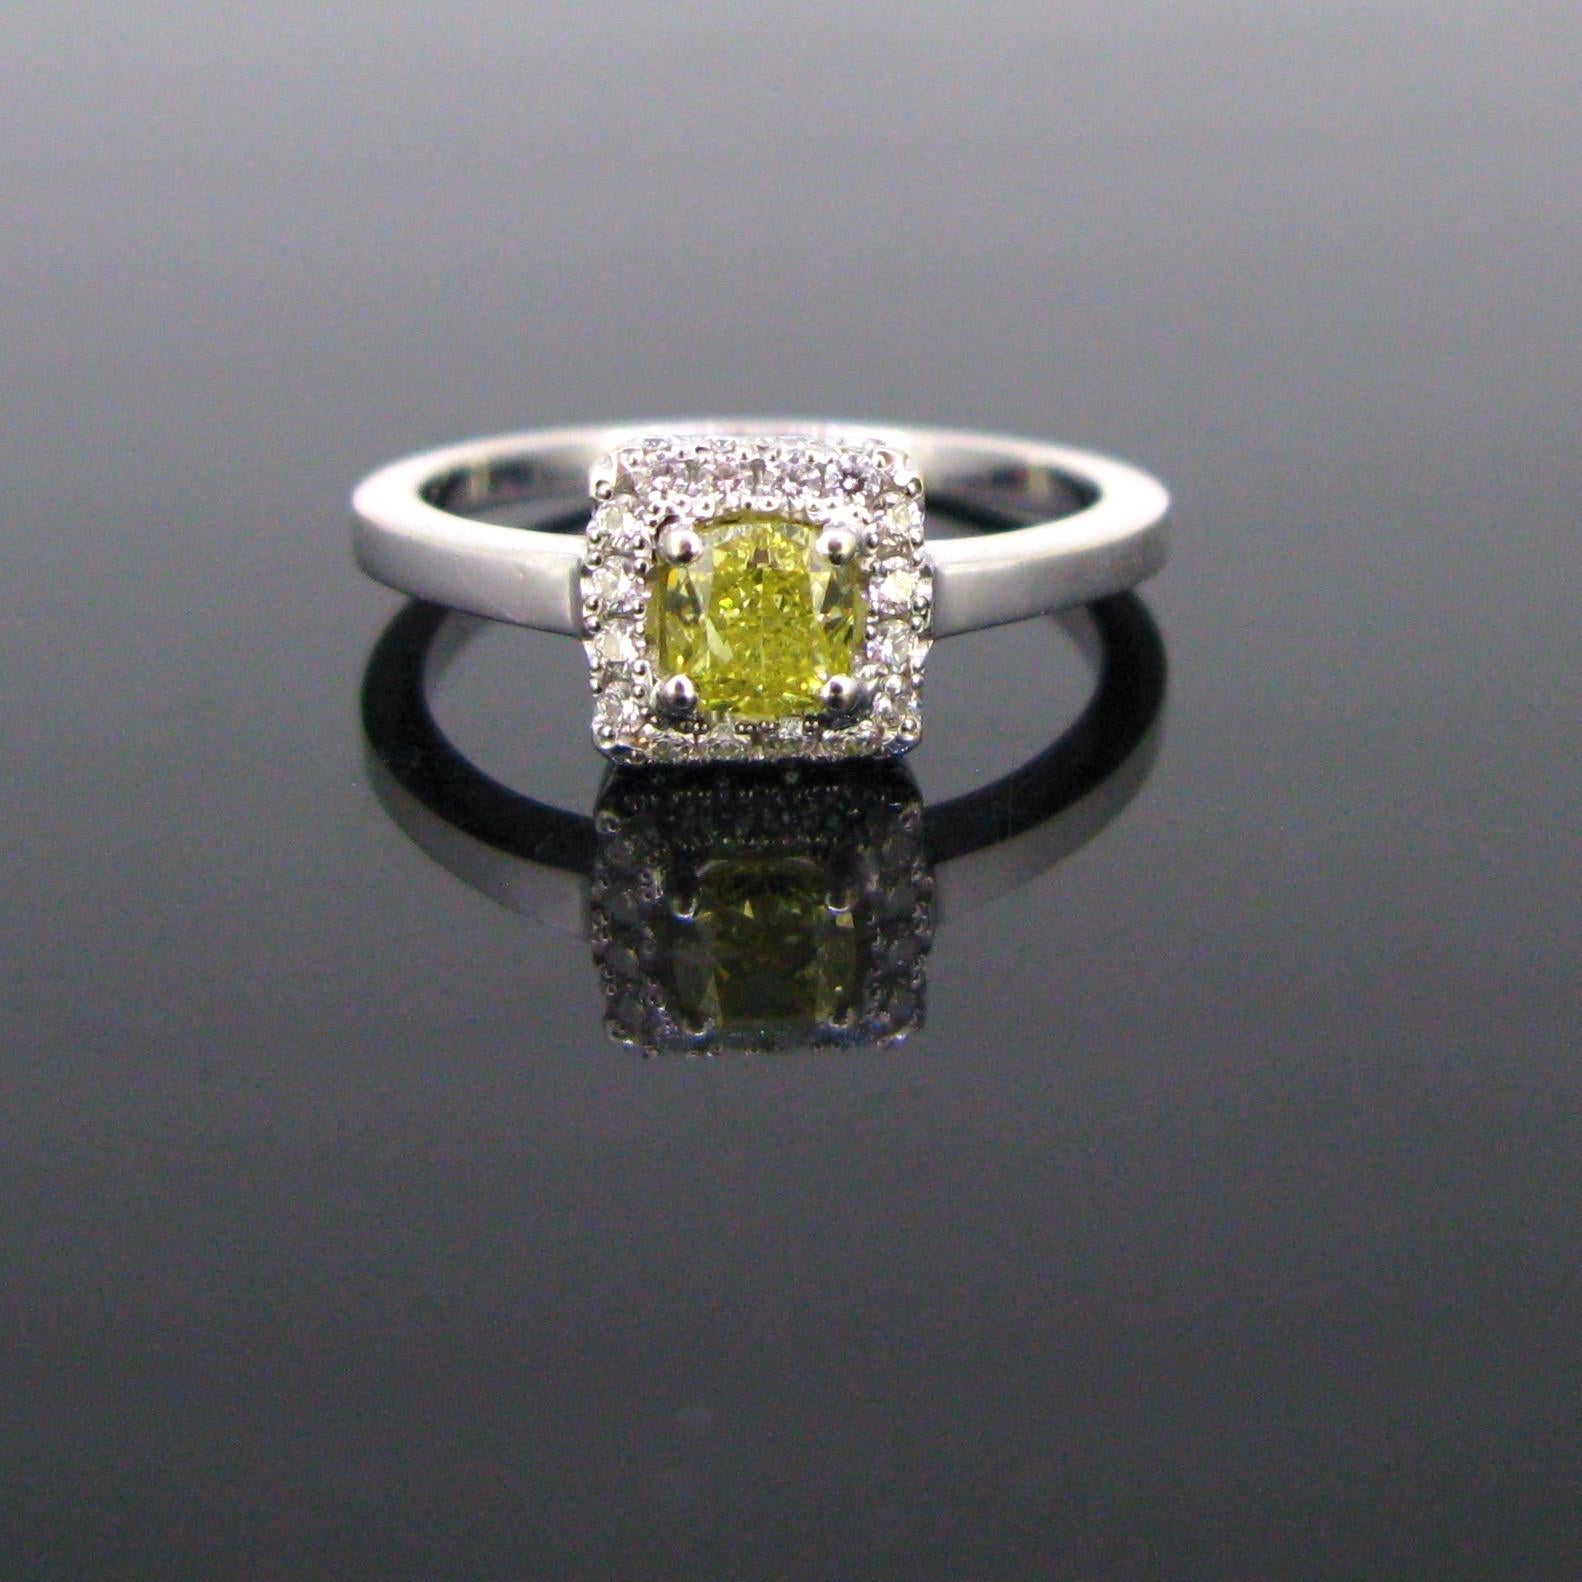 This timeless cluster ring is adorned with a Fancy Intense Yellow Diamond weighing around 0.50ct. It is framed with brilliant cut diamonds. The gallery is also set with diamonds. This ring is the perfect engagement ring. It is marked 750 inside the